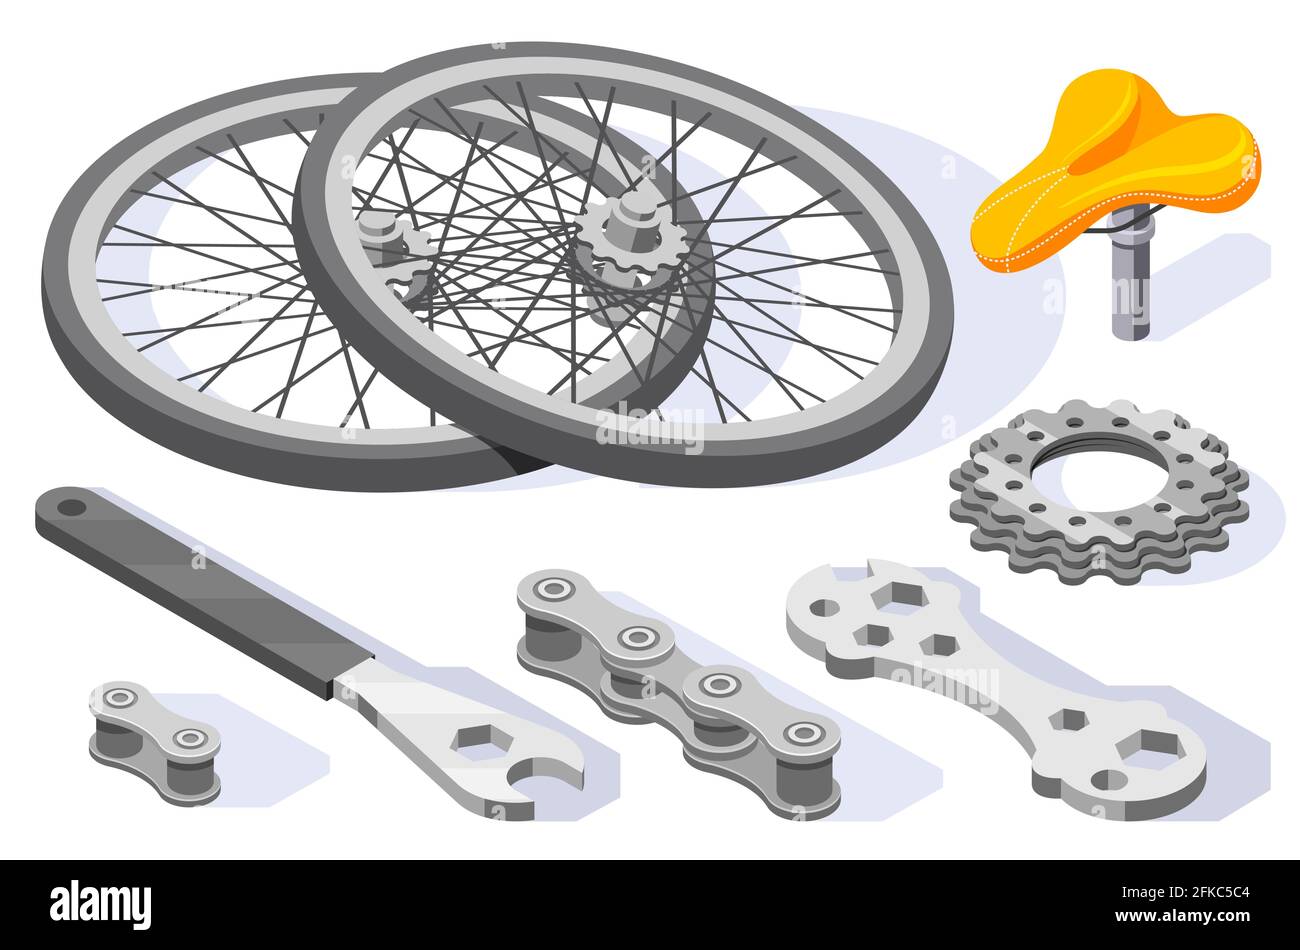 https://c8.alamy.com/comp/2FKC5C4/bicycle-repair-maintenance-tools-spare-parts-accessories-isometric-set-with-wheels-wrench-saddle-cogs-isolated-vector-illustration-2FKC5C4.jpg